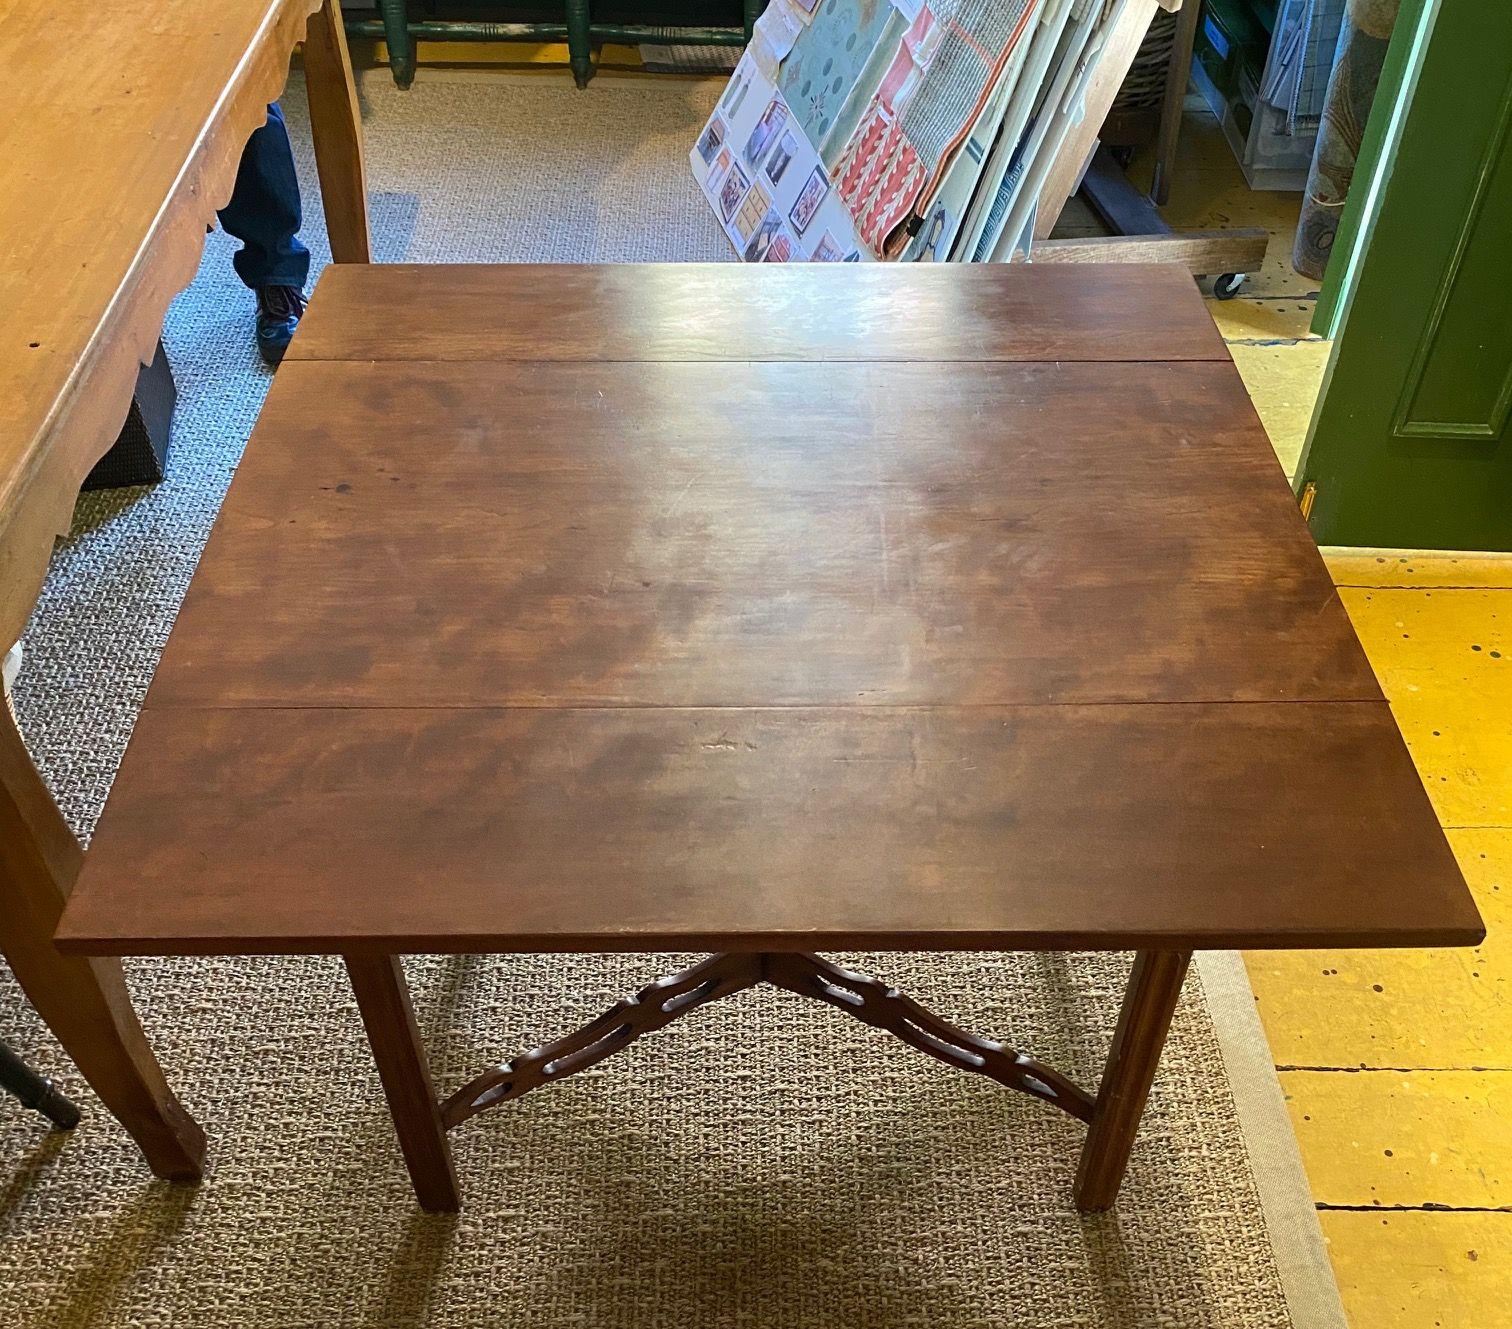 Southern New England Chippendale cherry drop-leaf table, probably from Connecticut, circa 1770, having a rectangular top with mid length drop leaves, raised on square chamfered legs braced by carved and pierced X-stretchers. The table remains in